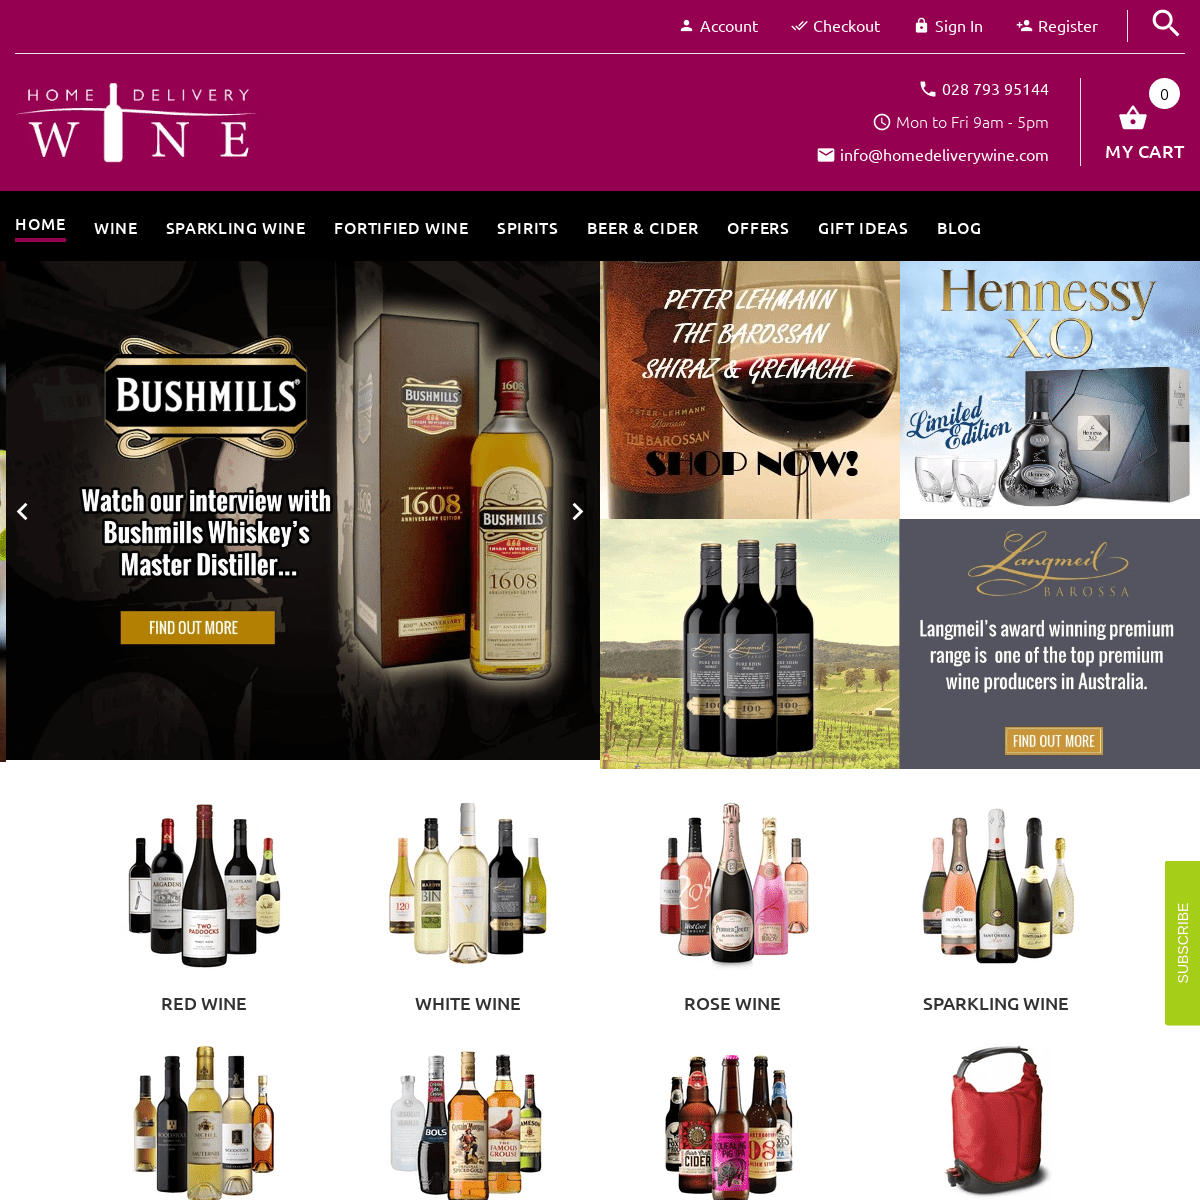 Home Delivery Wine – homedeliverywine.com